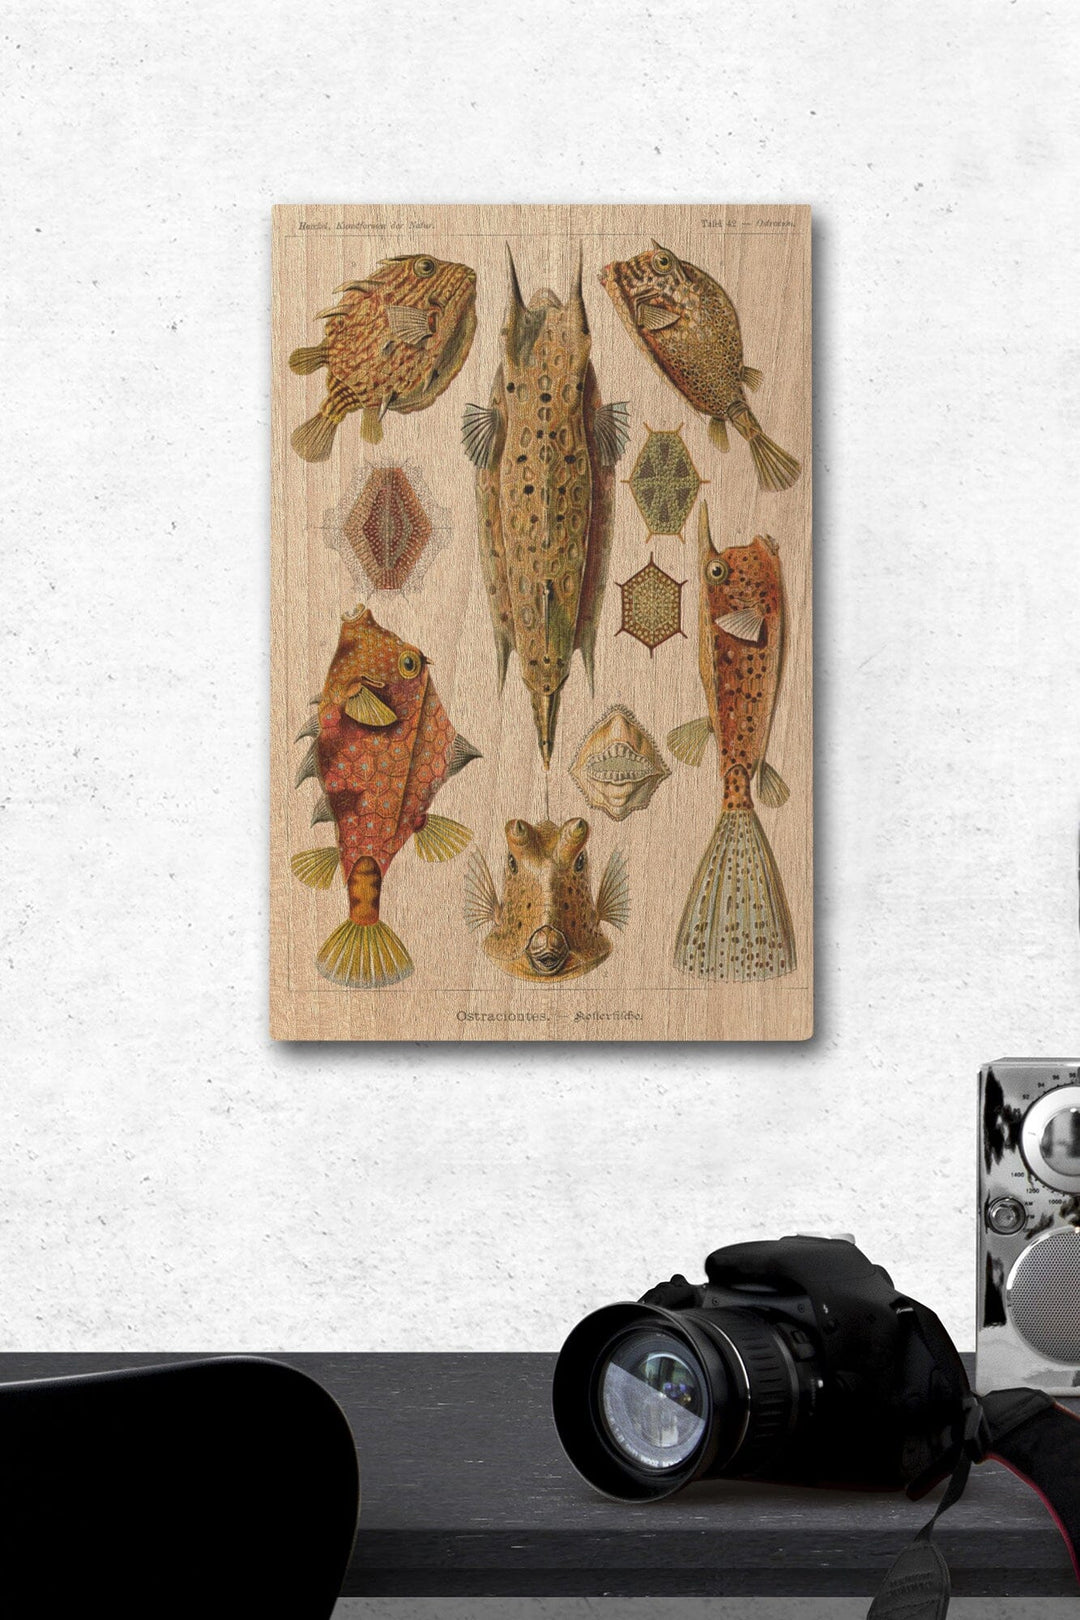 Art Forms of Nature, Ostraciontes (Boxfish), Ernst Haeckel Artwork, Wood Signs and Postcards Wood Lantern Press 12 x 18 Wood Gallery Print 